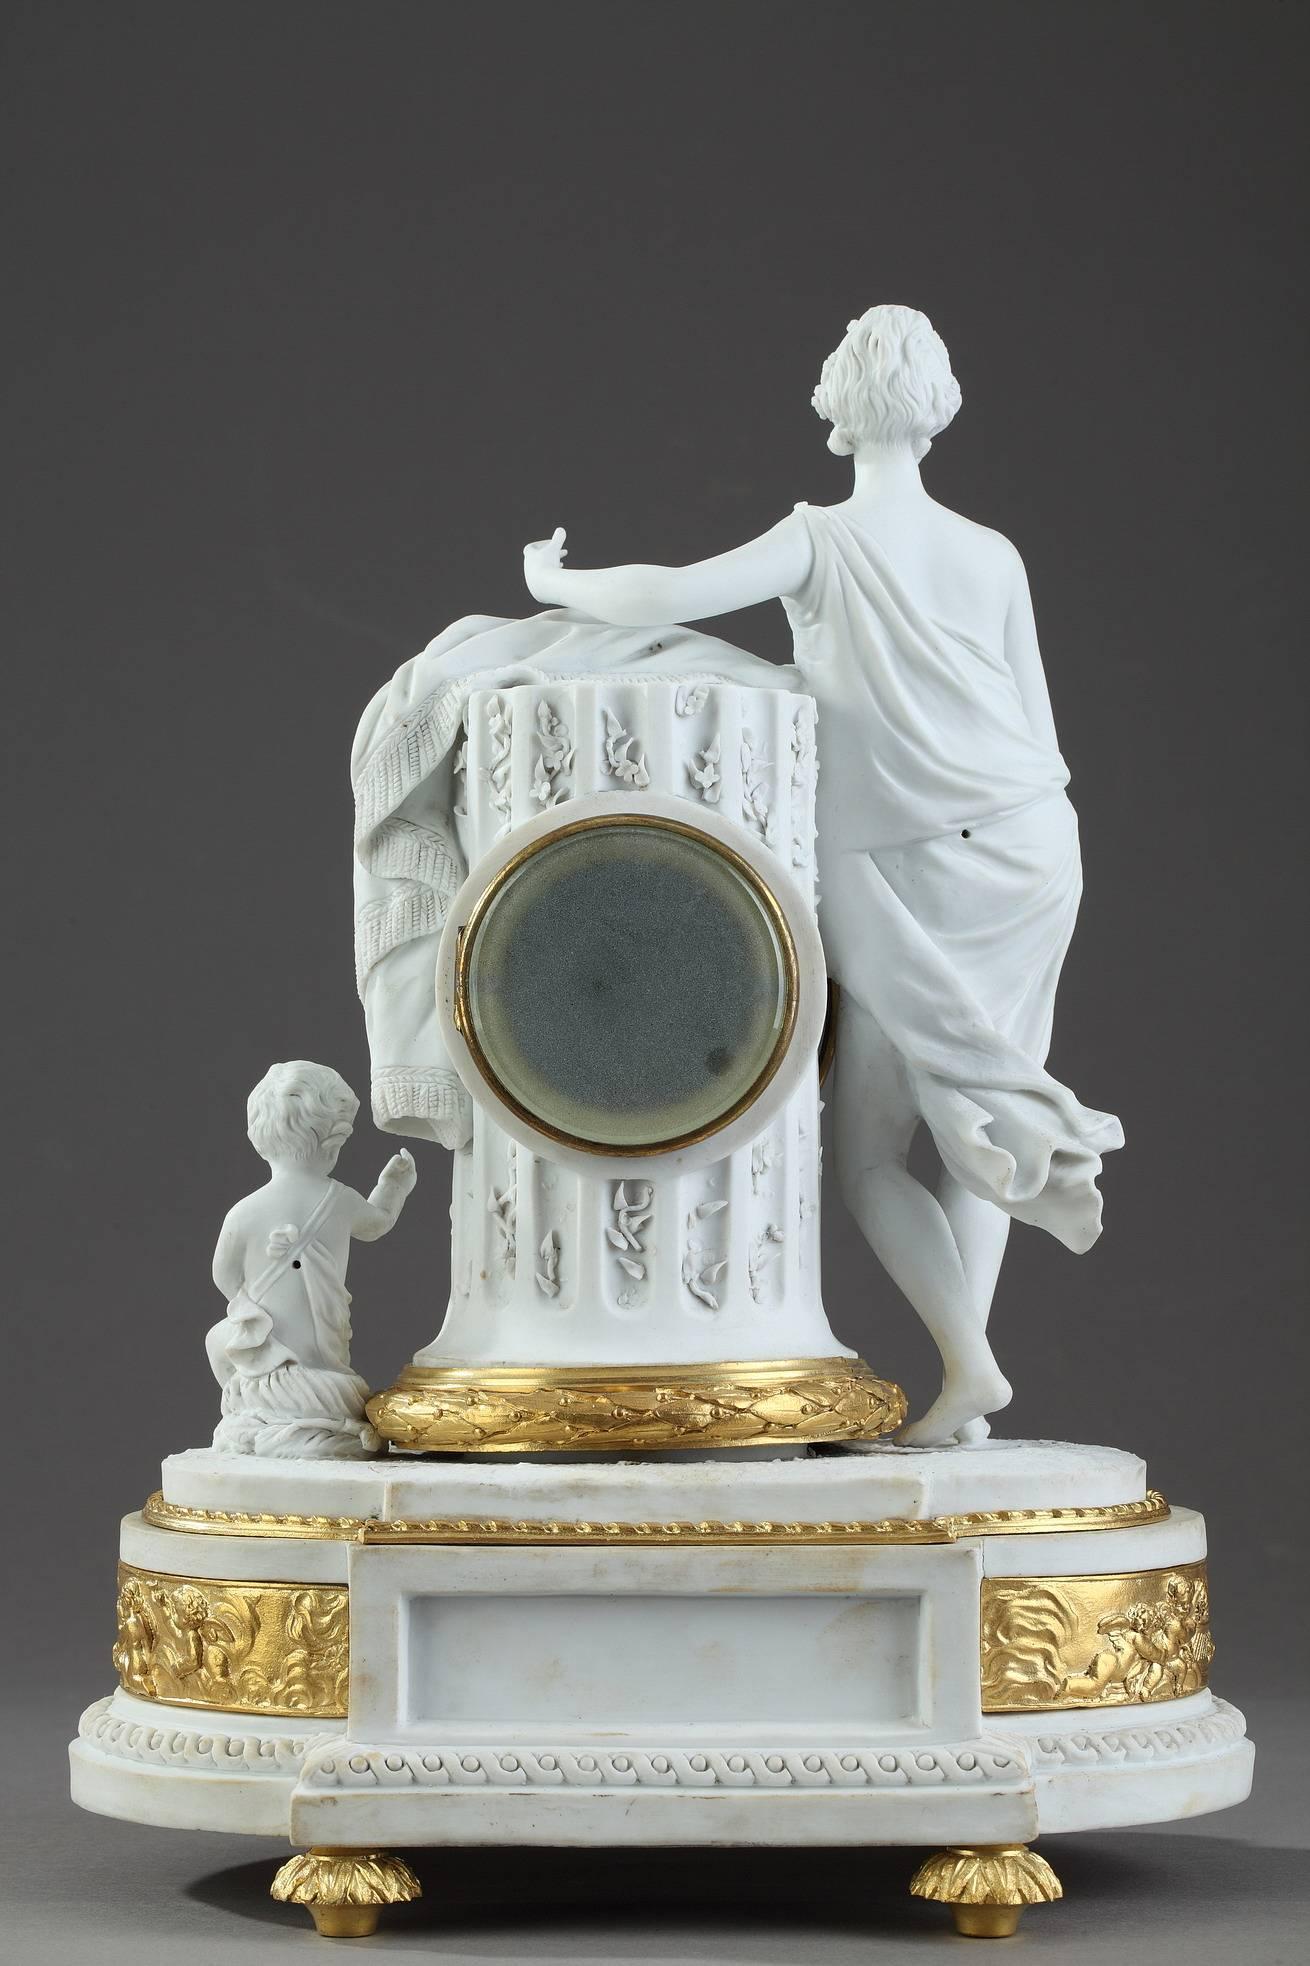 Bisque Clock in Louis XVI Style Signed Huppe and Lefauche Paris 1